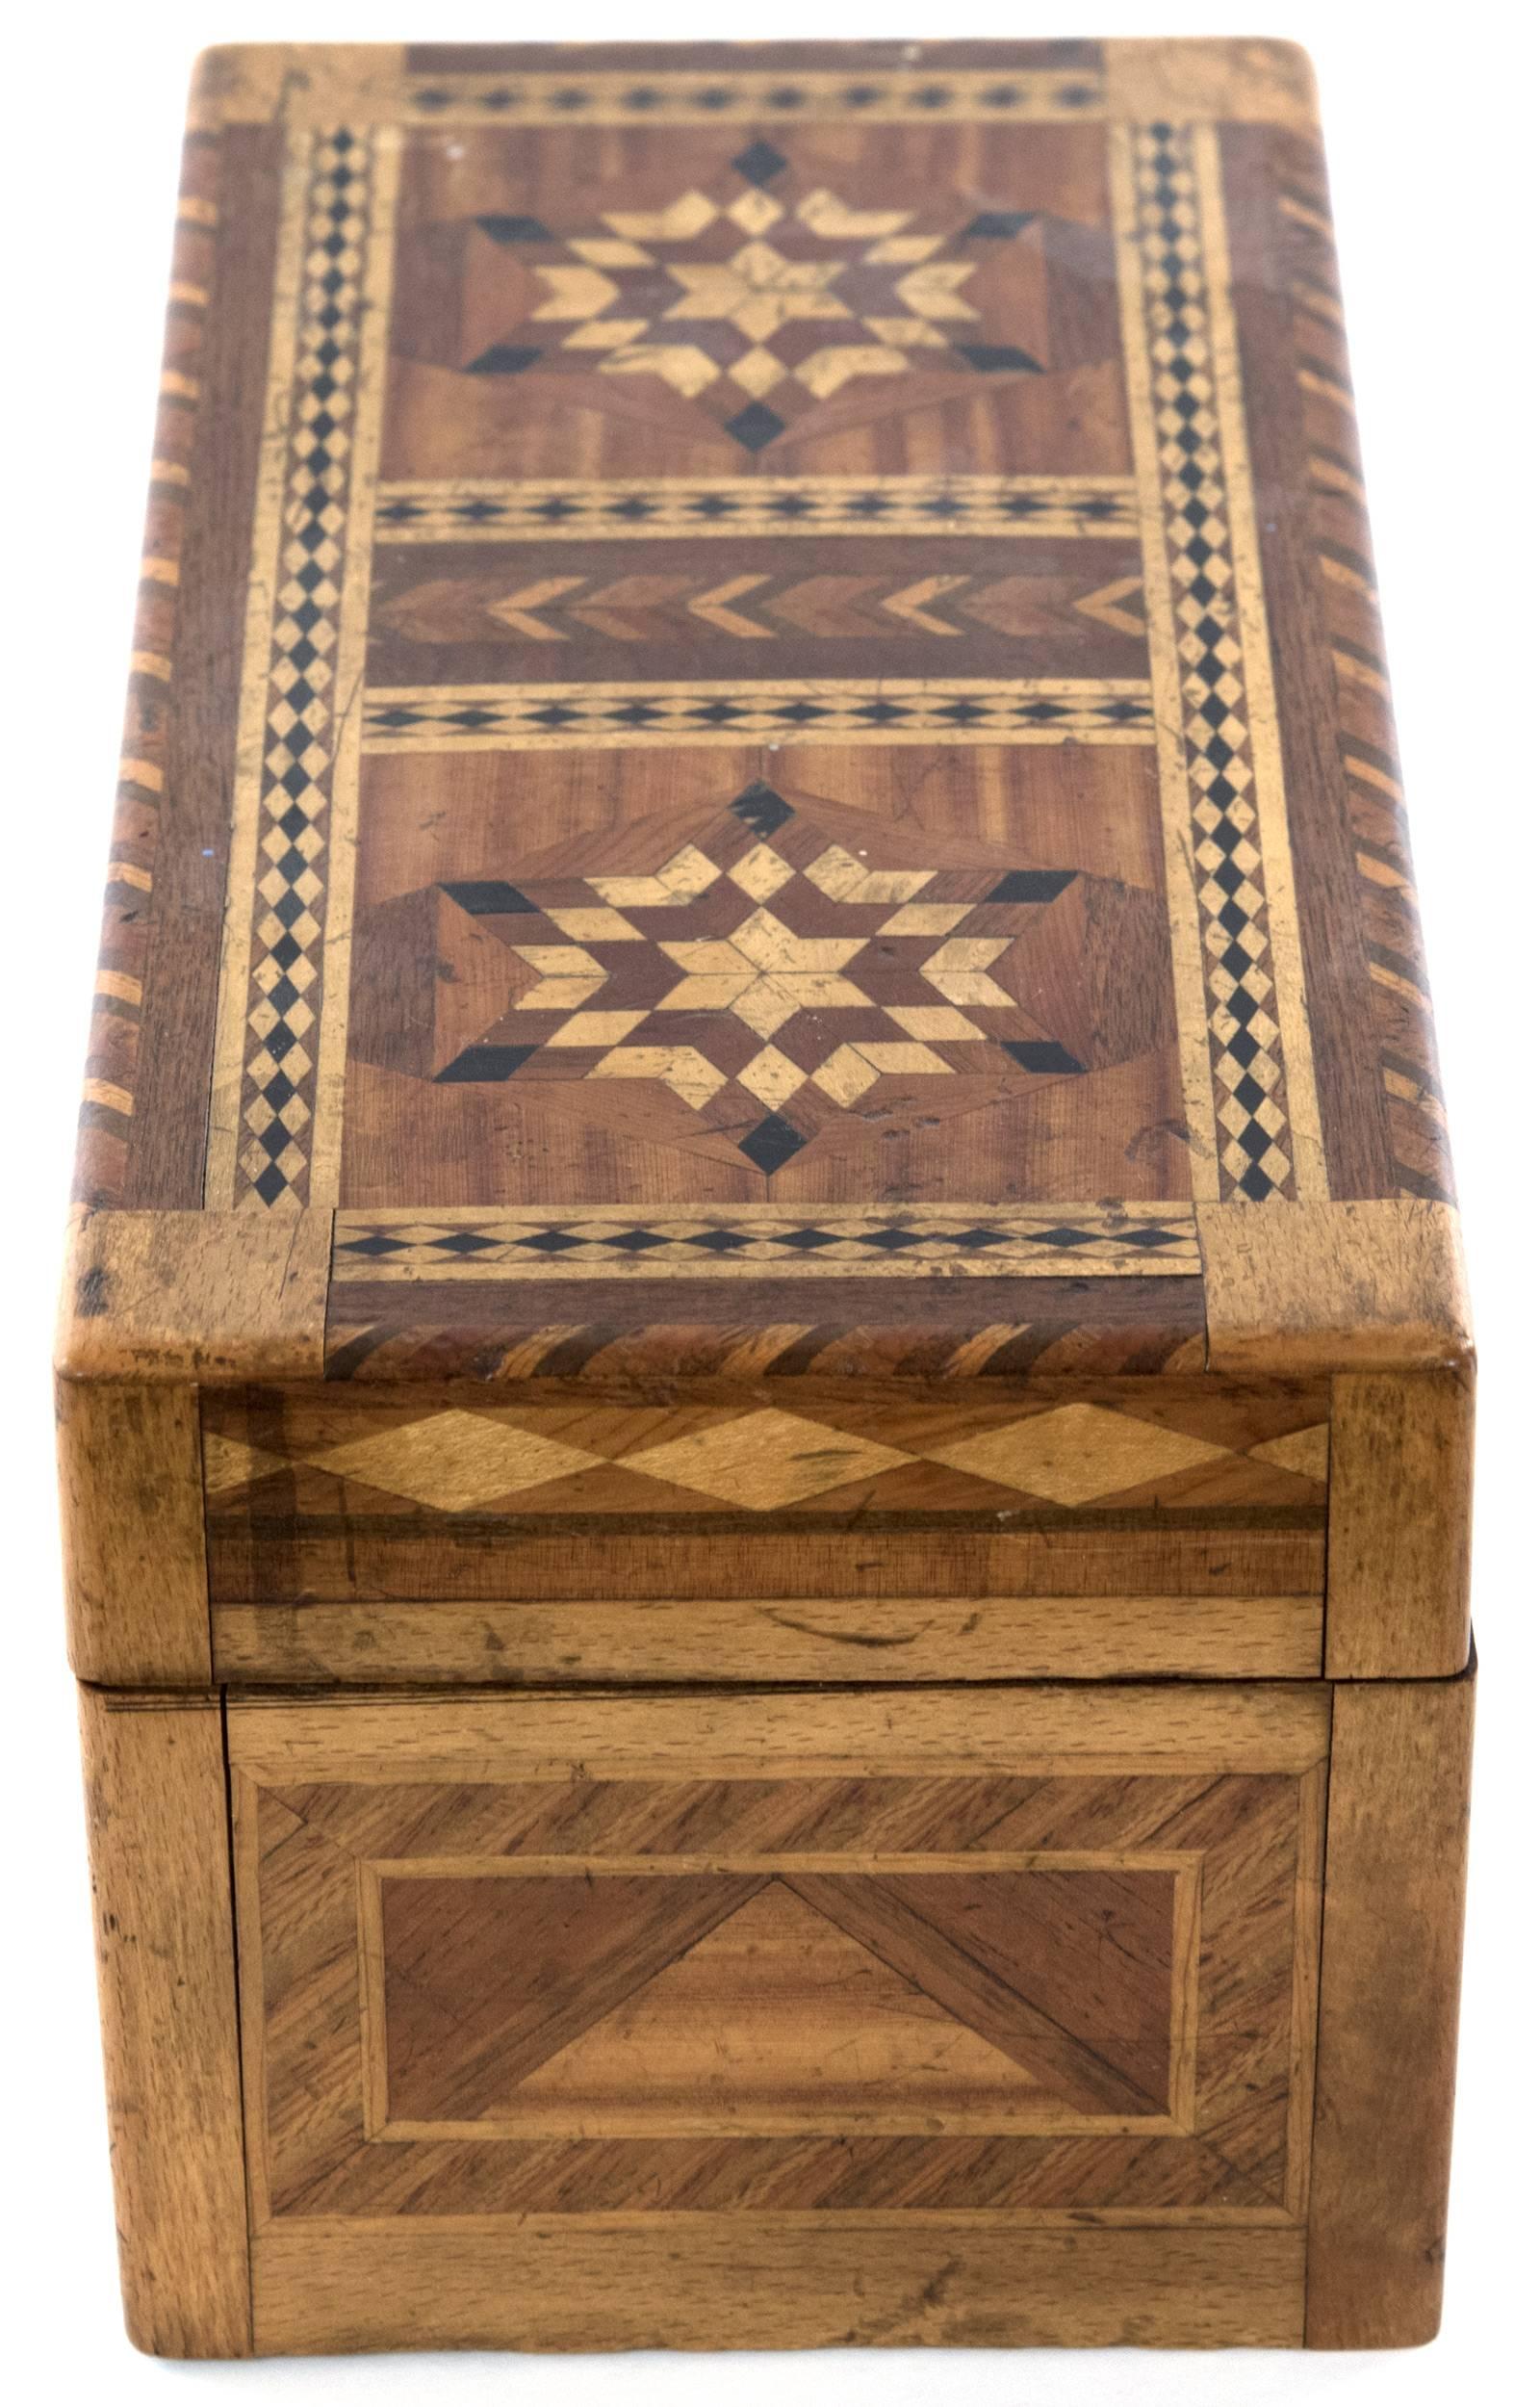 A hinged-lid box with contrasting parquetry inlaid design of light and dark woods in geometric panels and banding, with two six-point stars on the lid. The interior compartment is lined with purple fabric, and the base is lined with parchment